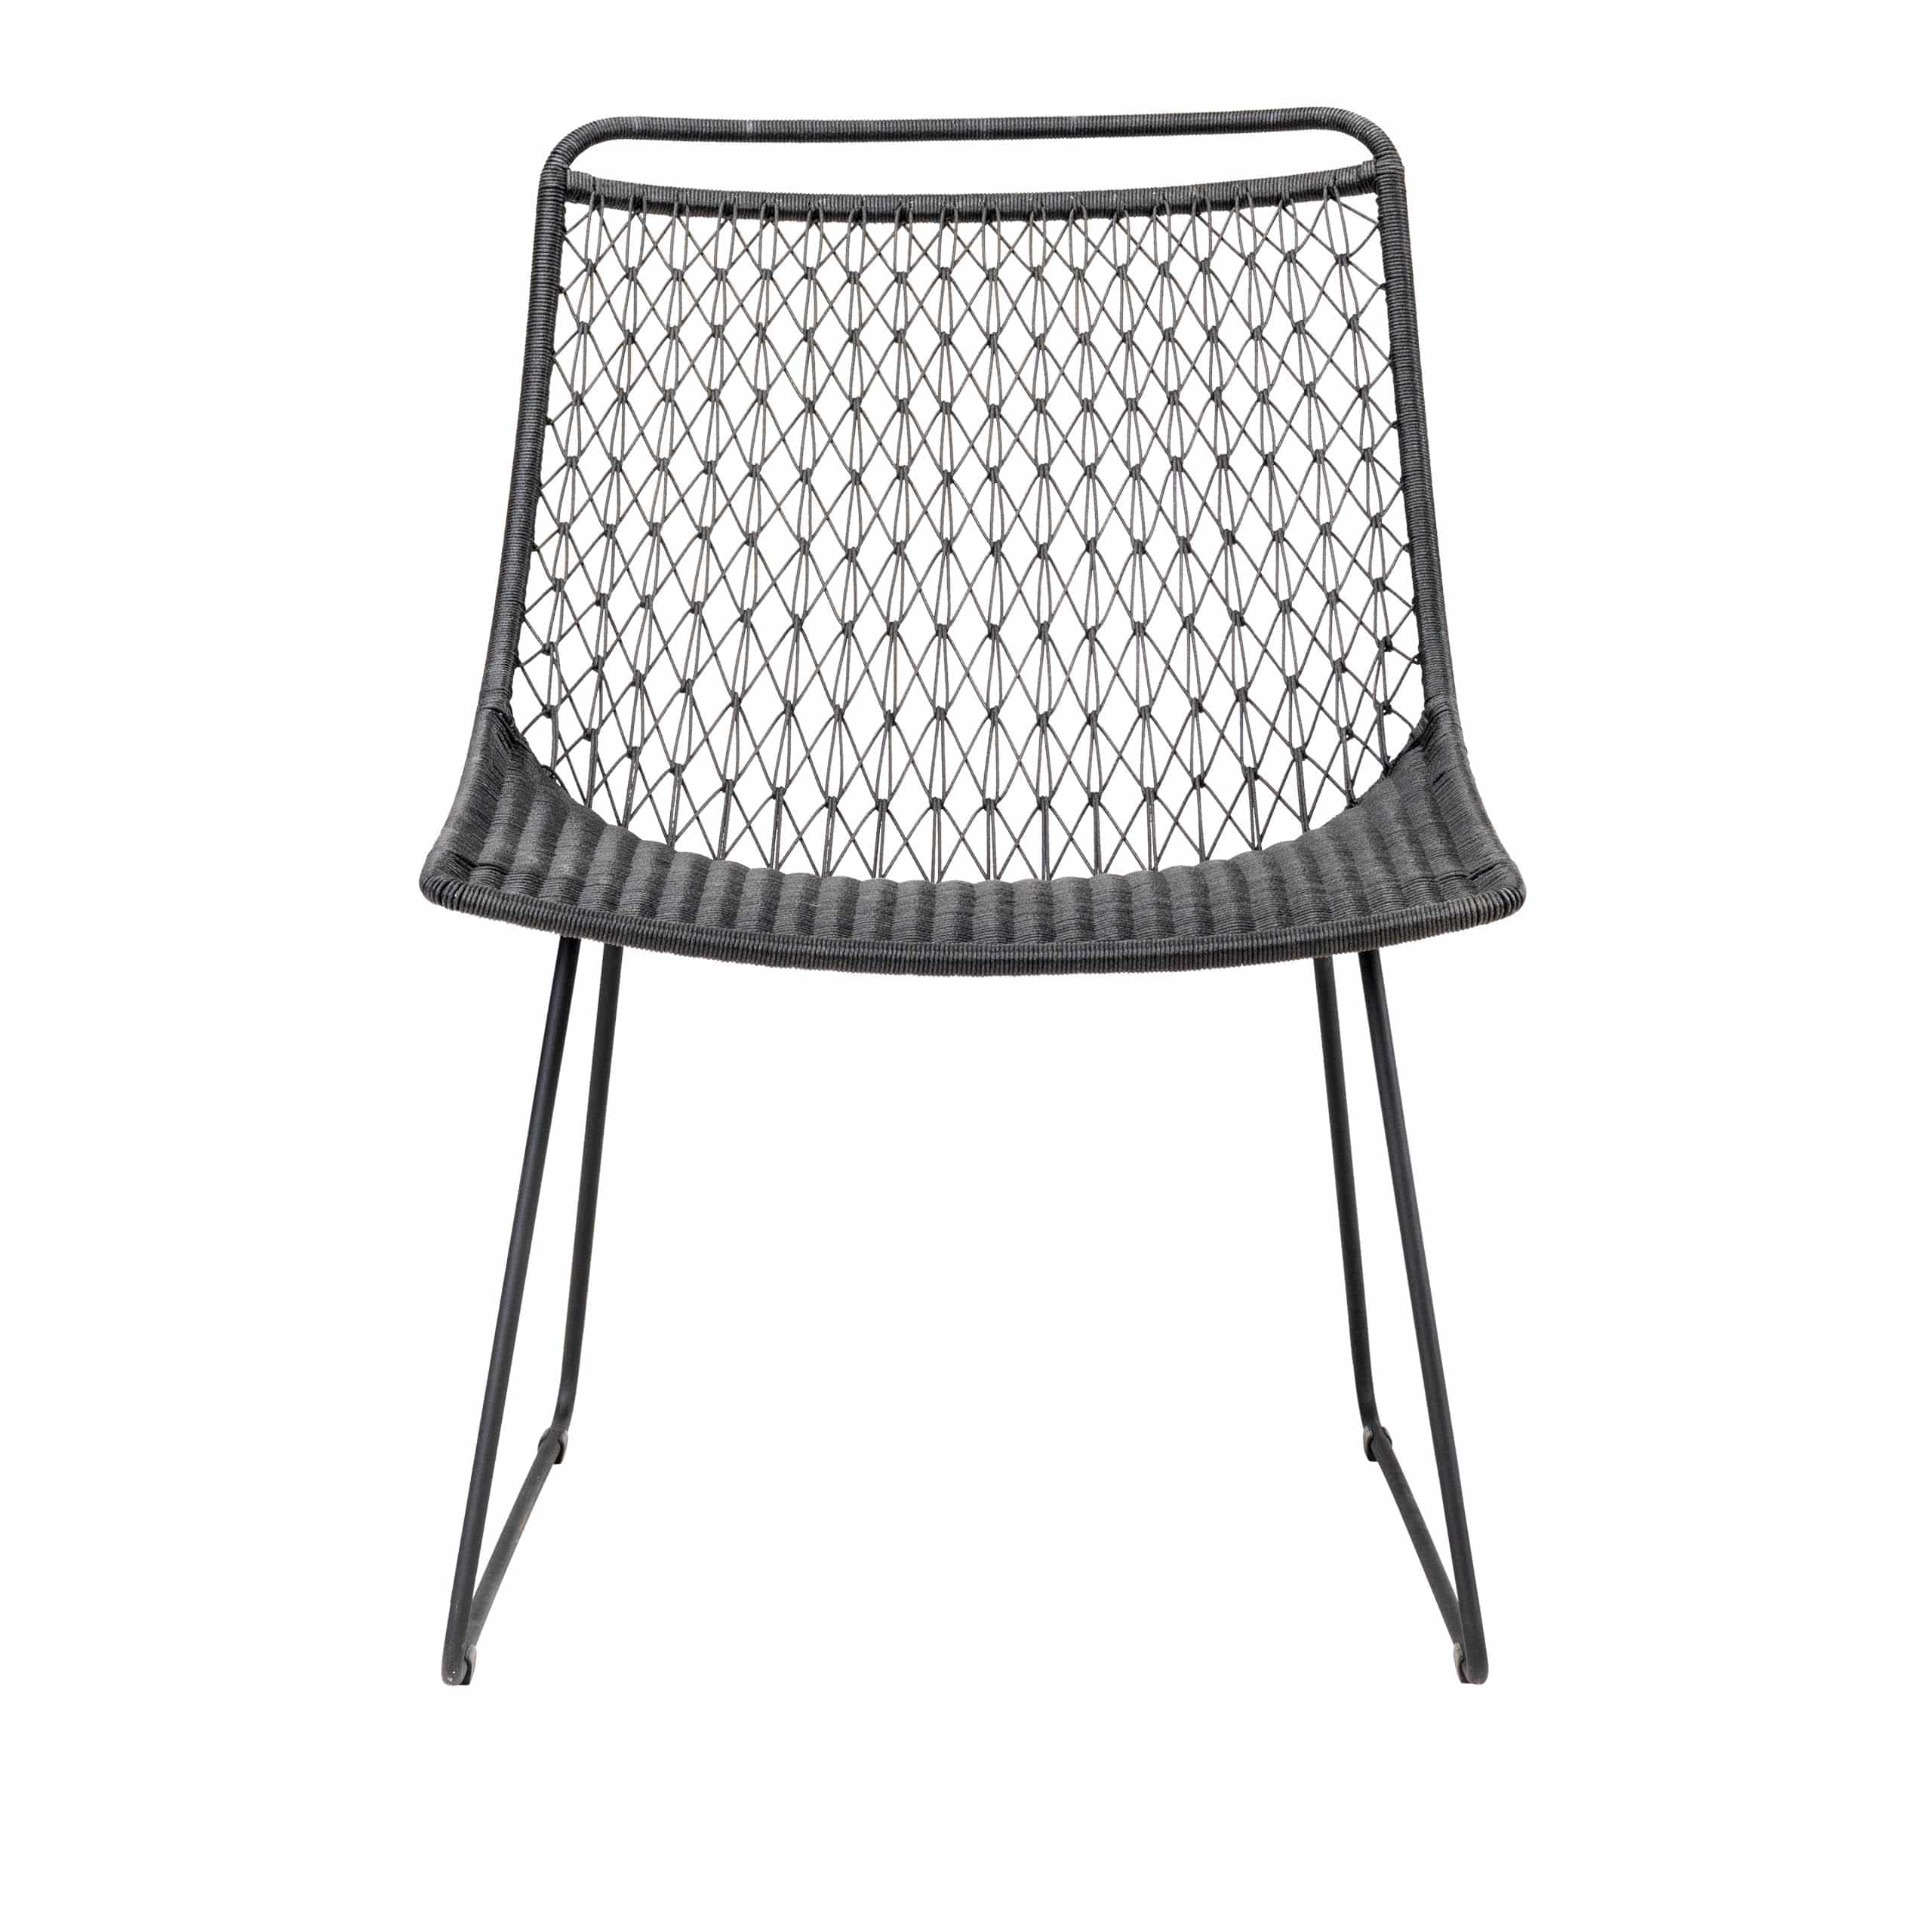 Design Warehouse - 128344 - Milly Outdoor Relaxing Chair  - Lava